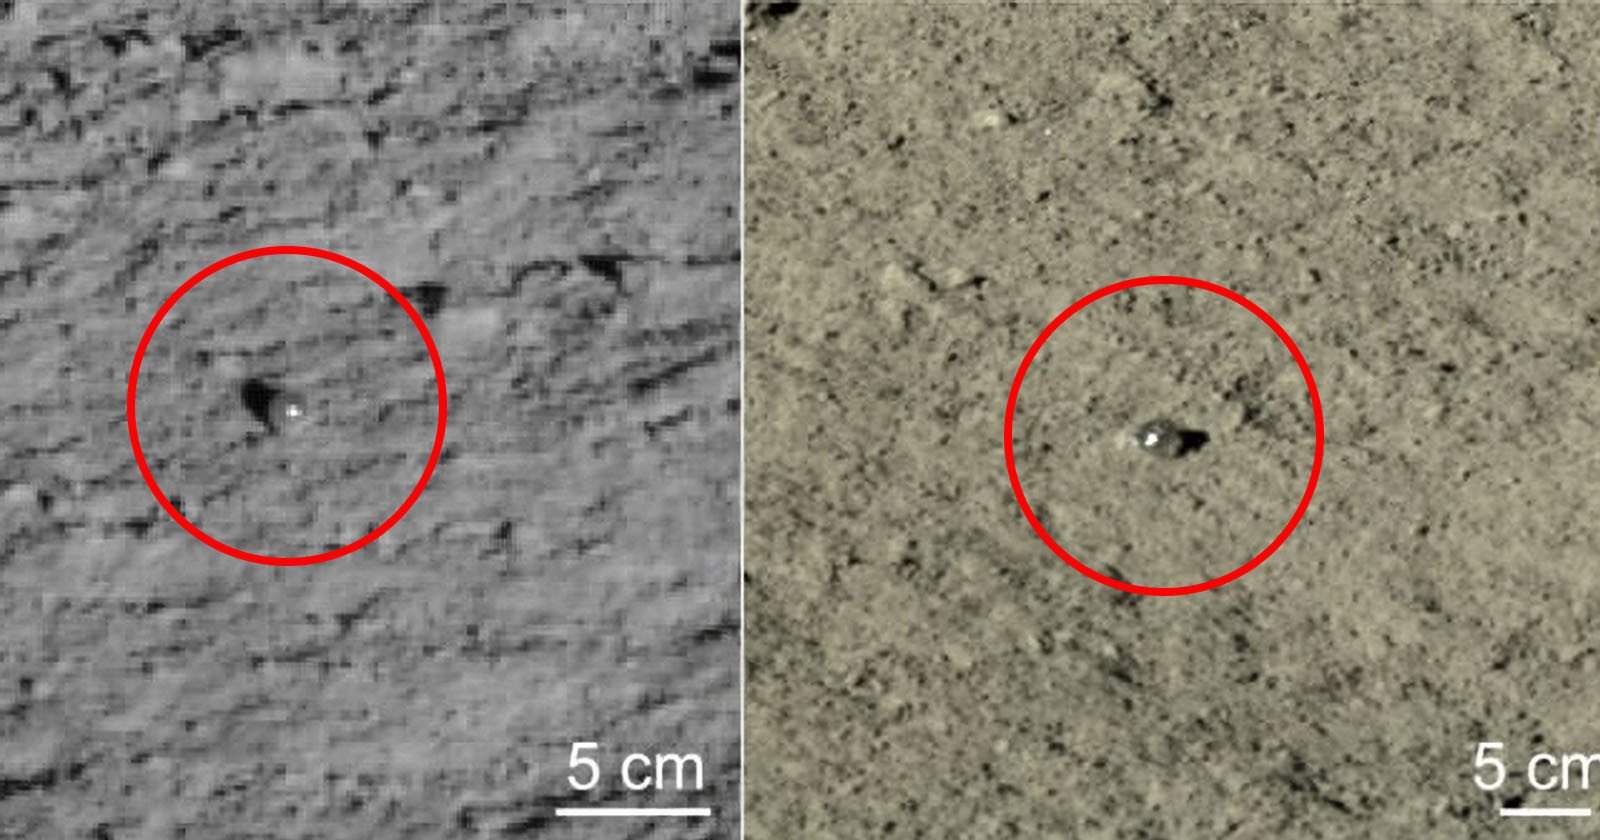 China Rover Captures Photos of Glass Orbs on Far Side of the Moon